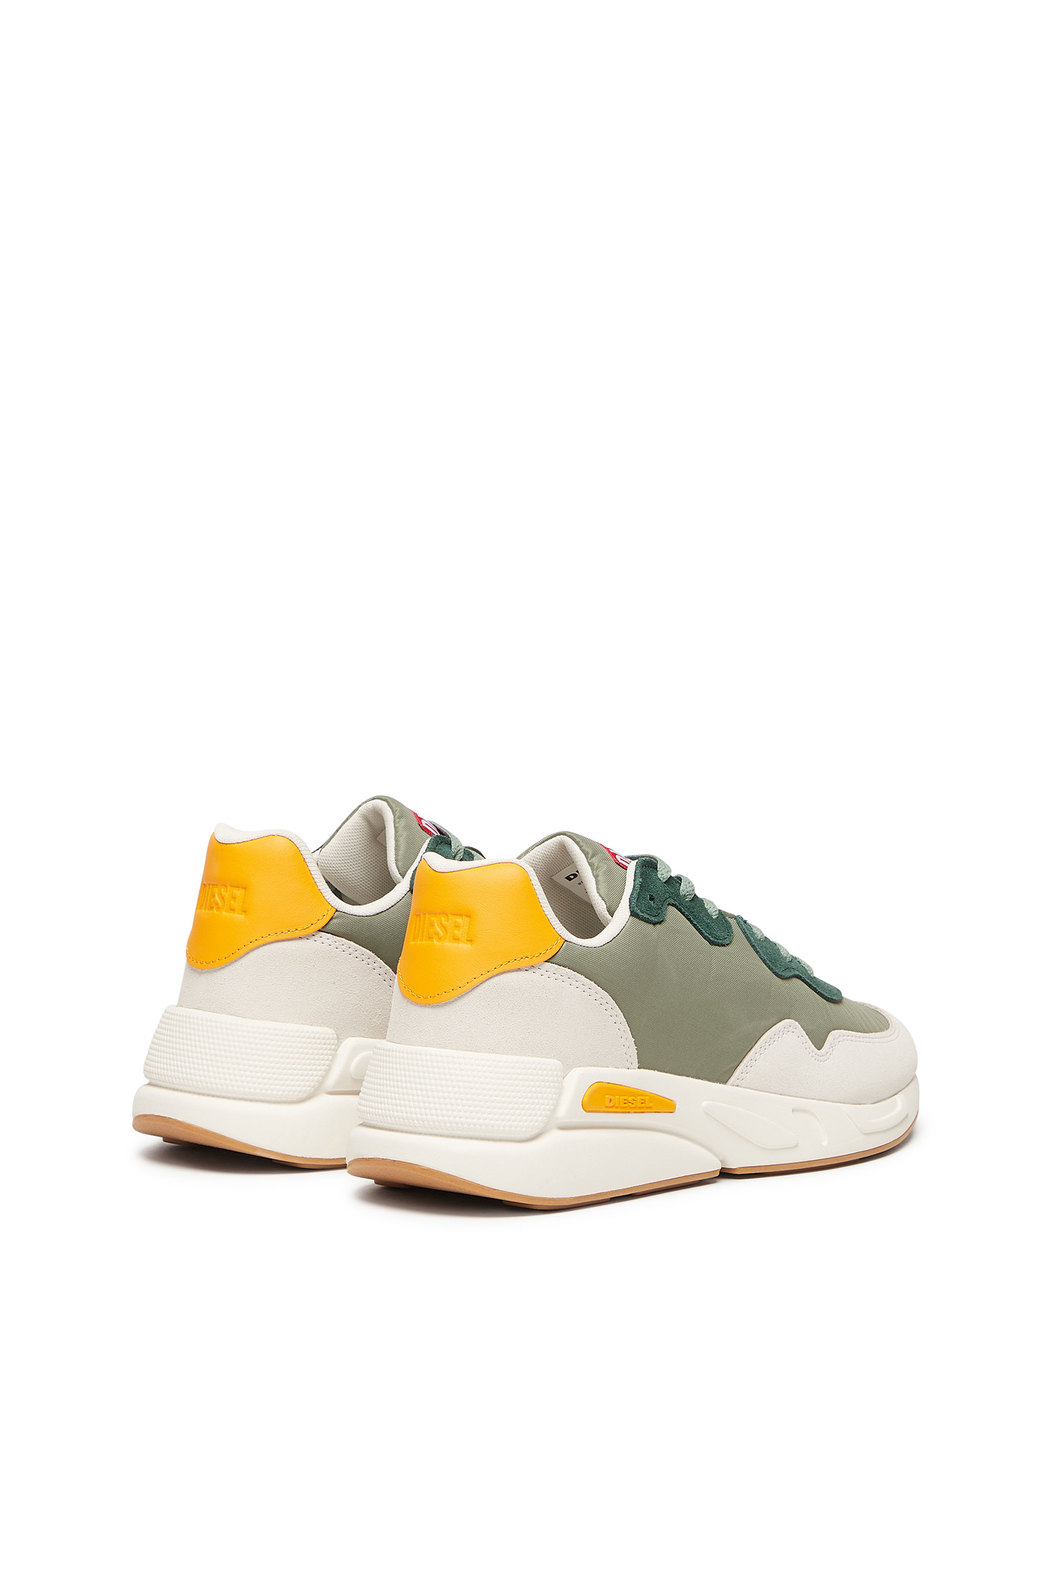 S-Serendipity Light - Sneakers with contoured panels